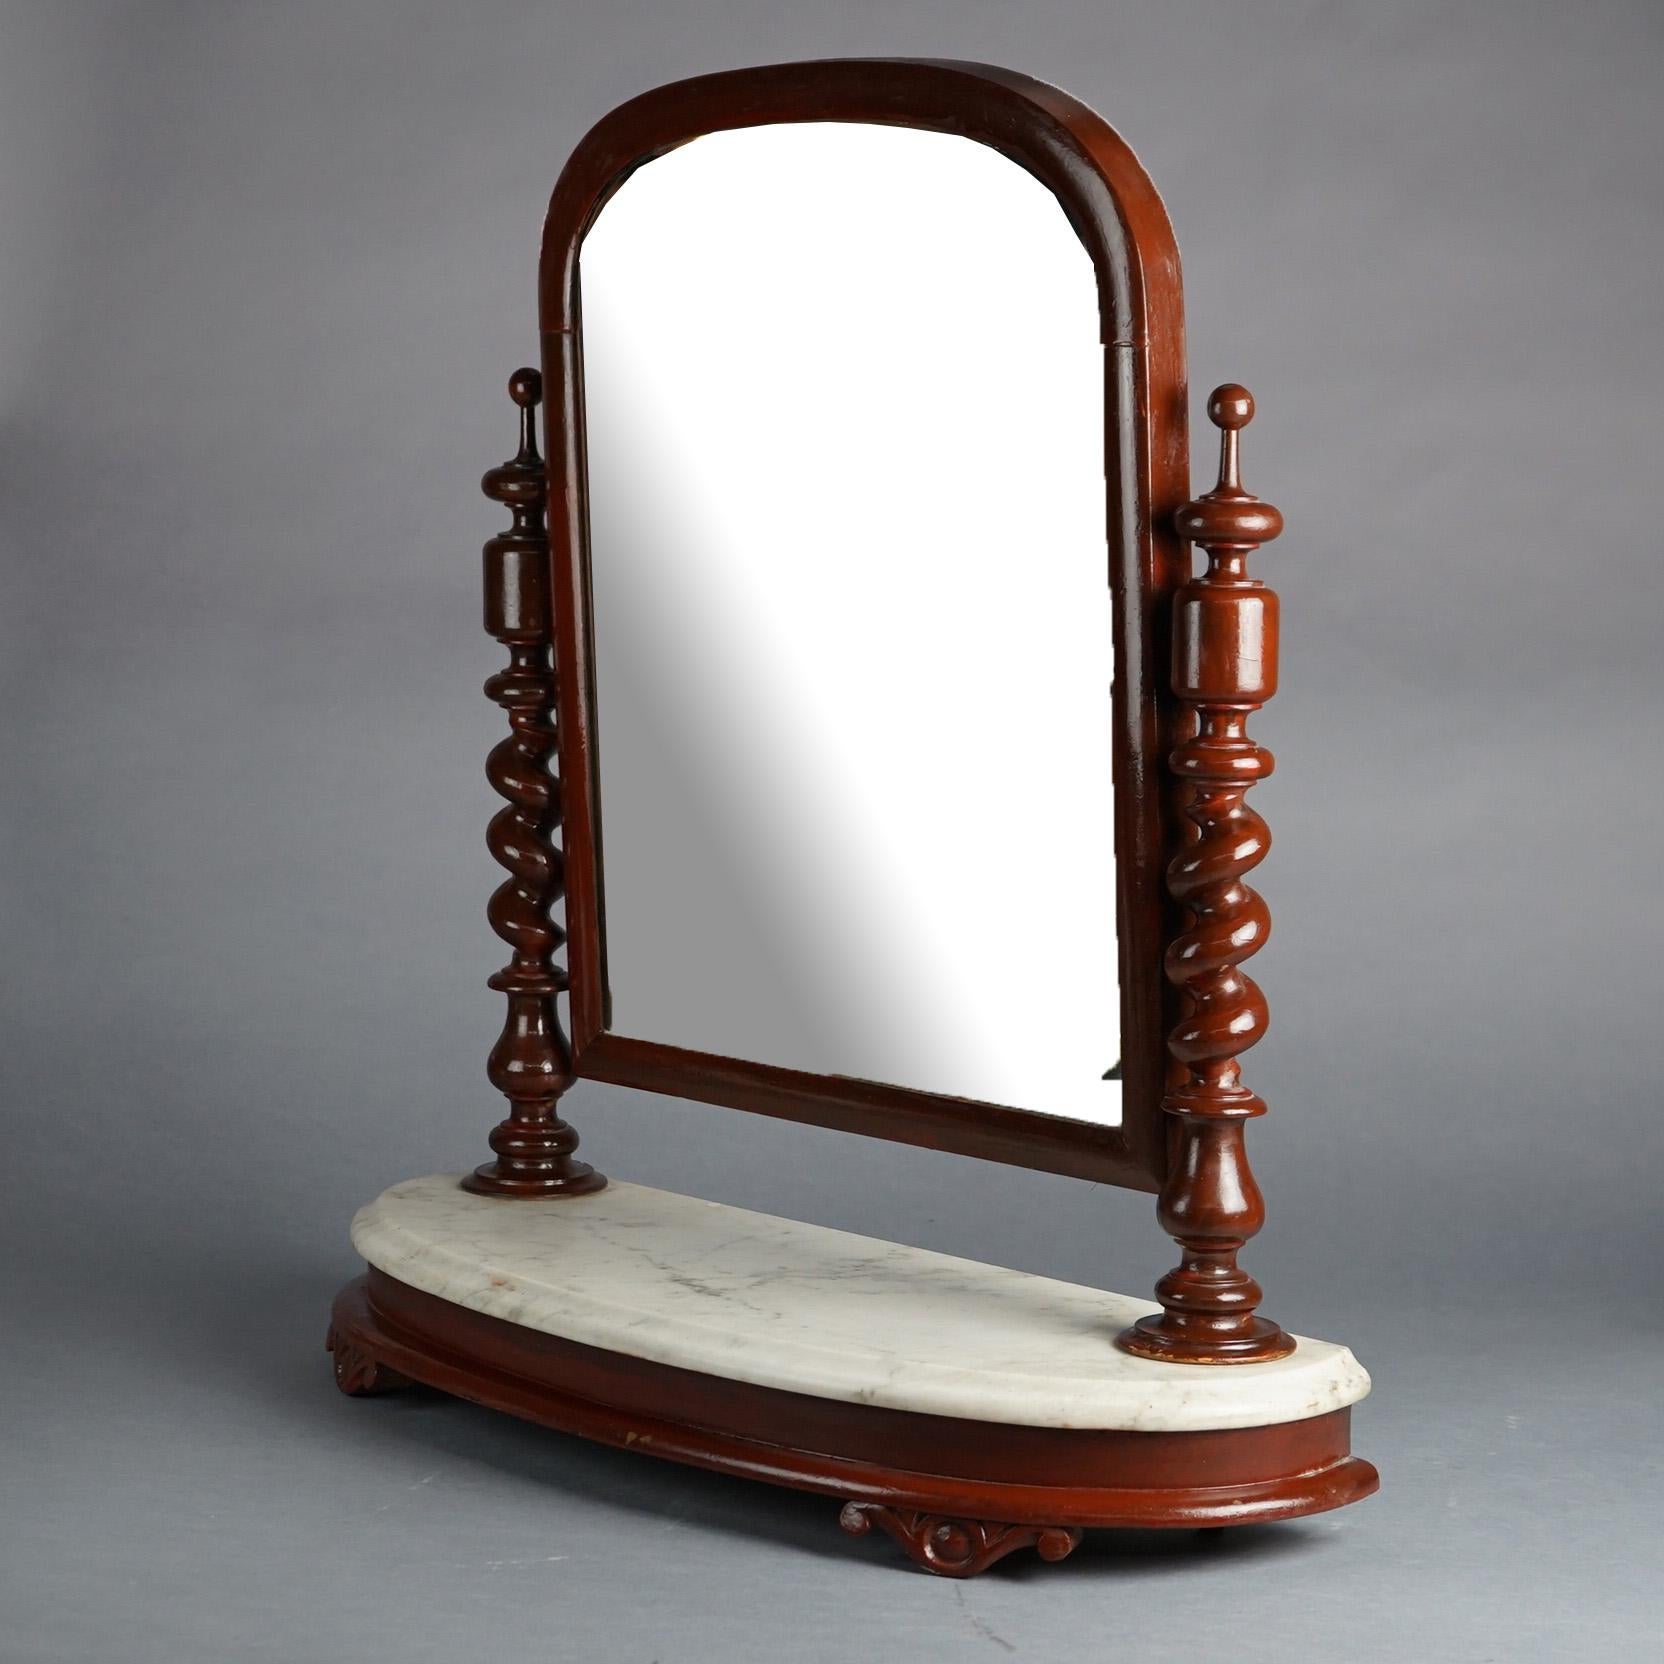 Antique English Elizabethan shaving mirror offers mahogany construction with arched mirror having flanking rope twist supports over marble top base, 19th century

Measures- 27.75''H x 26.75''W x 9.25''D